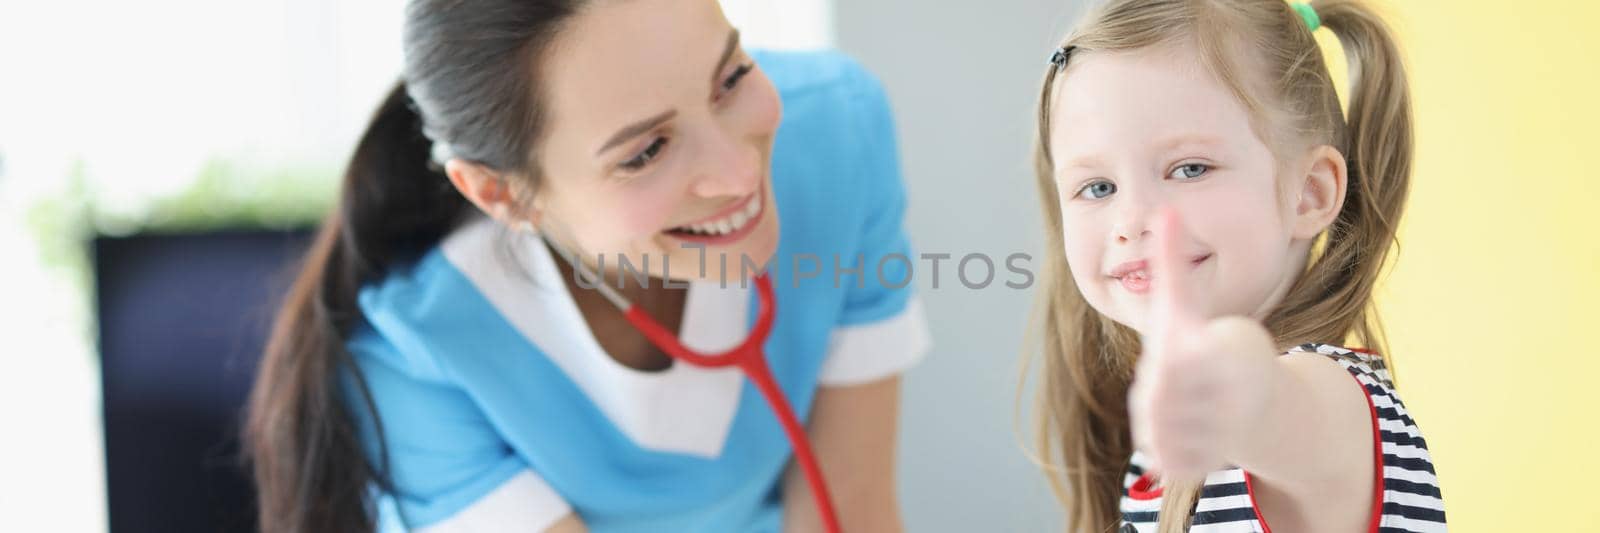 Girl being examined by pediatrician doctor, happy child show thumbs up gesture by kuprevich